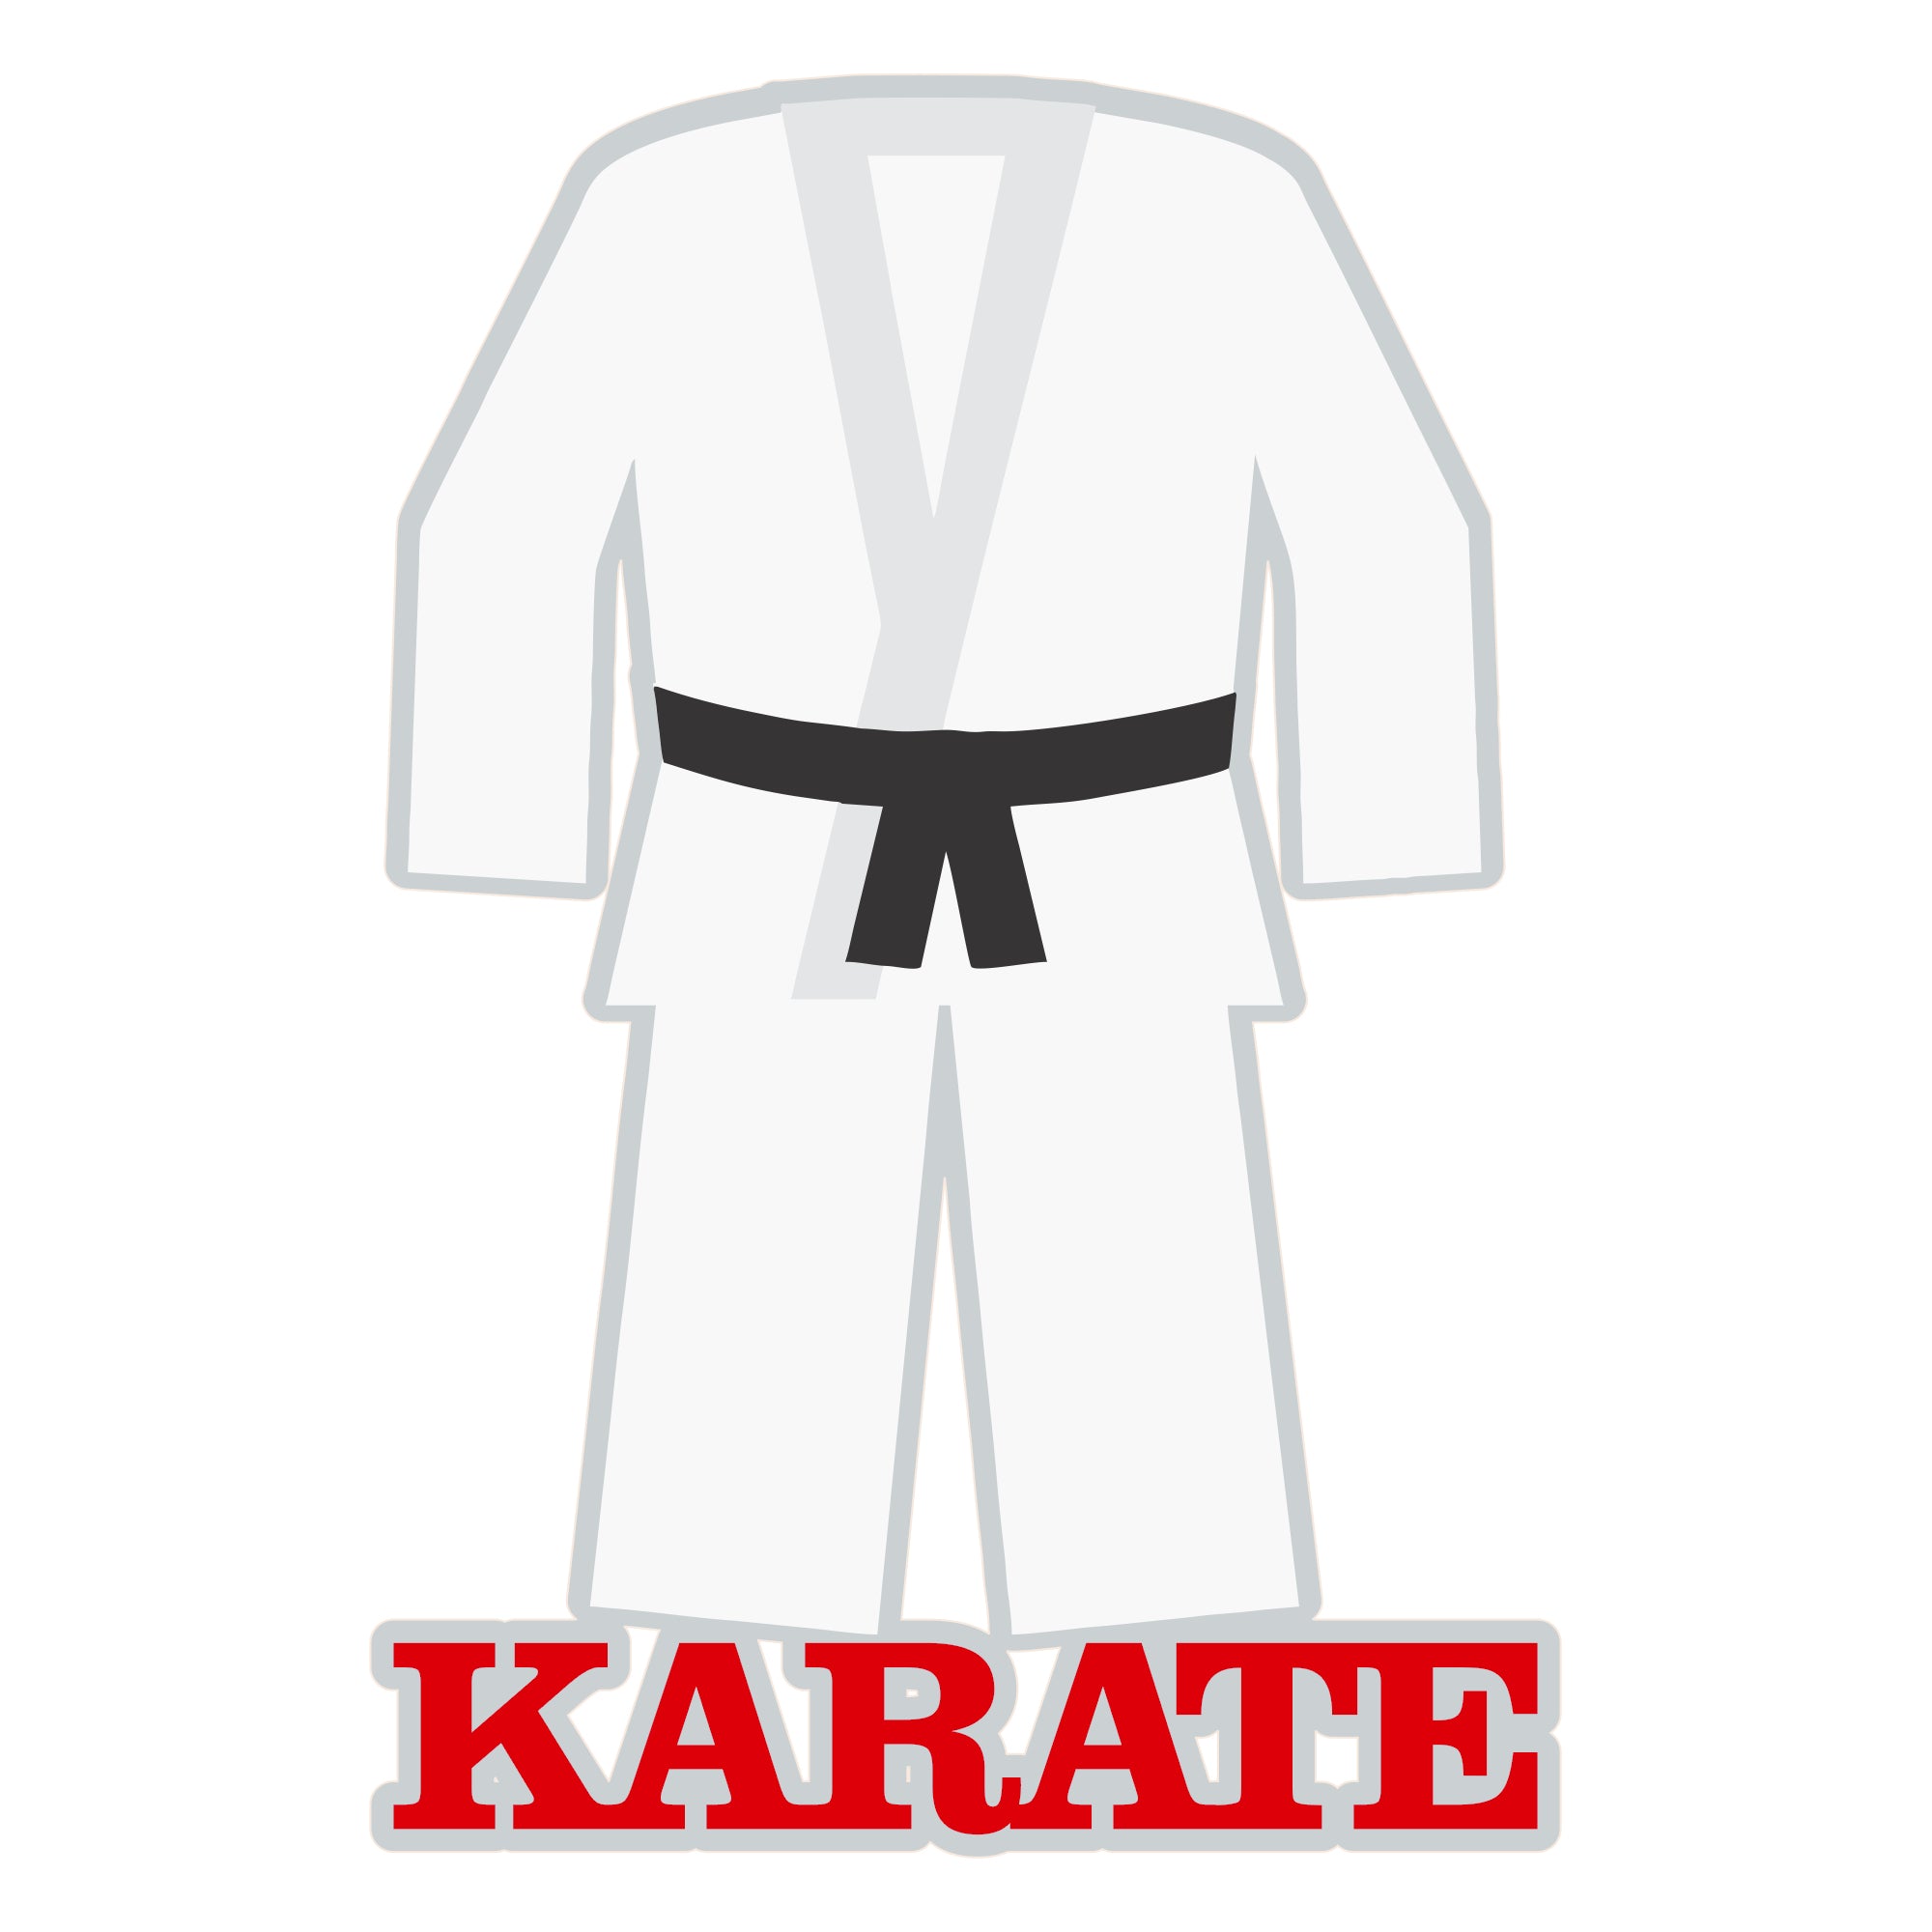 Sports Collection Karate 4.25 x 6.25 Fully-Assembled Laser Cut by SSC Laser Designs